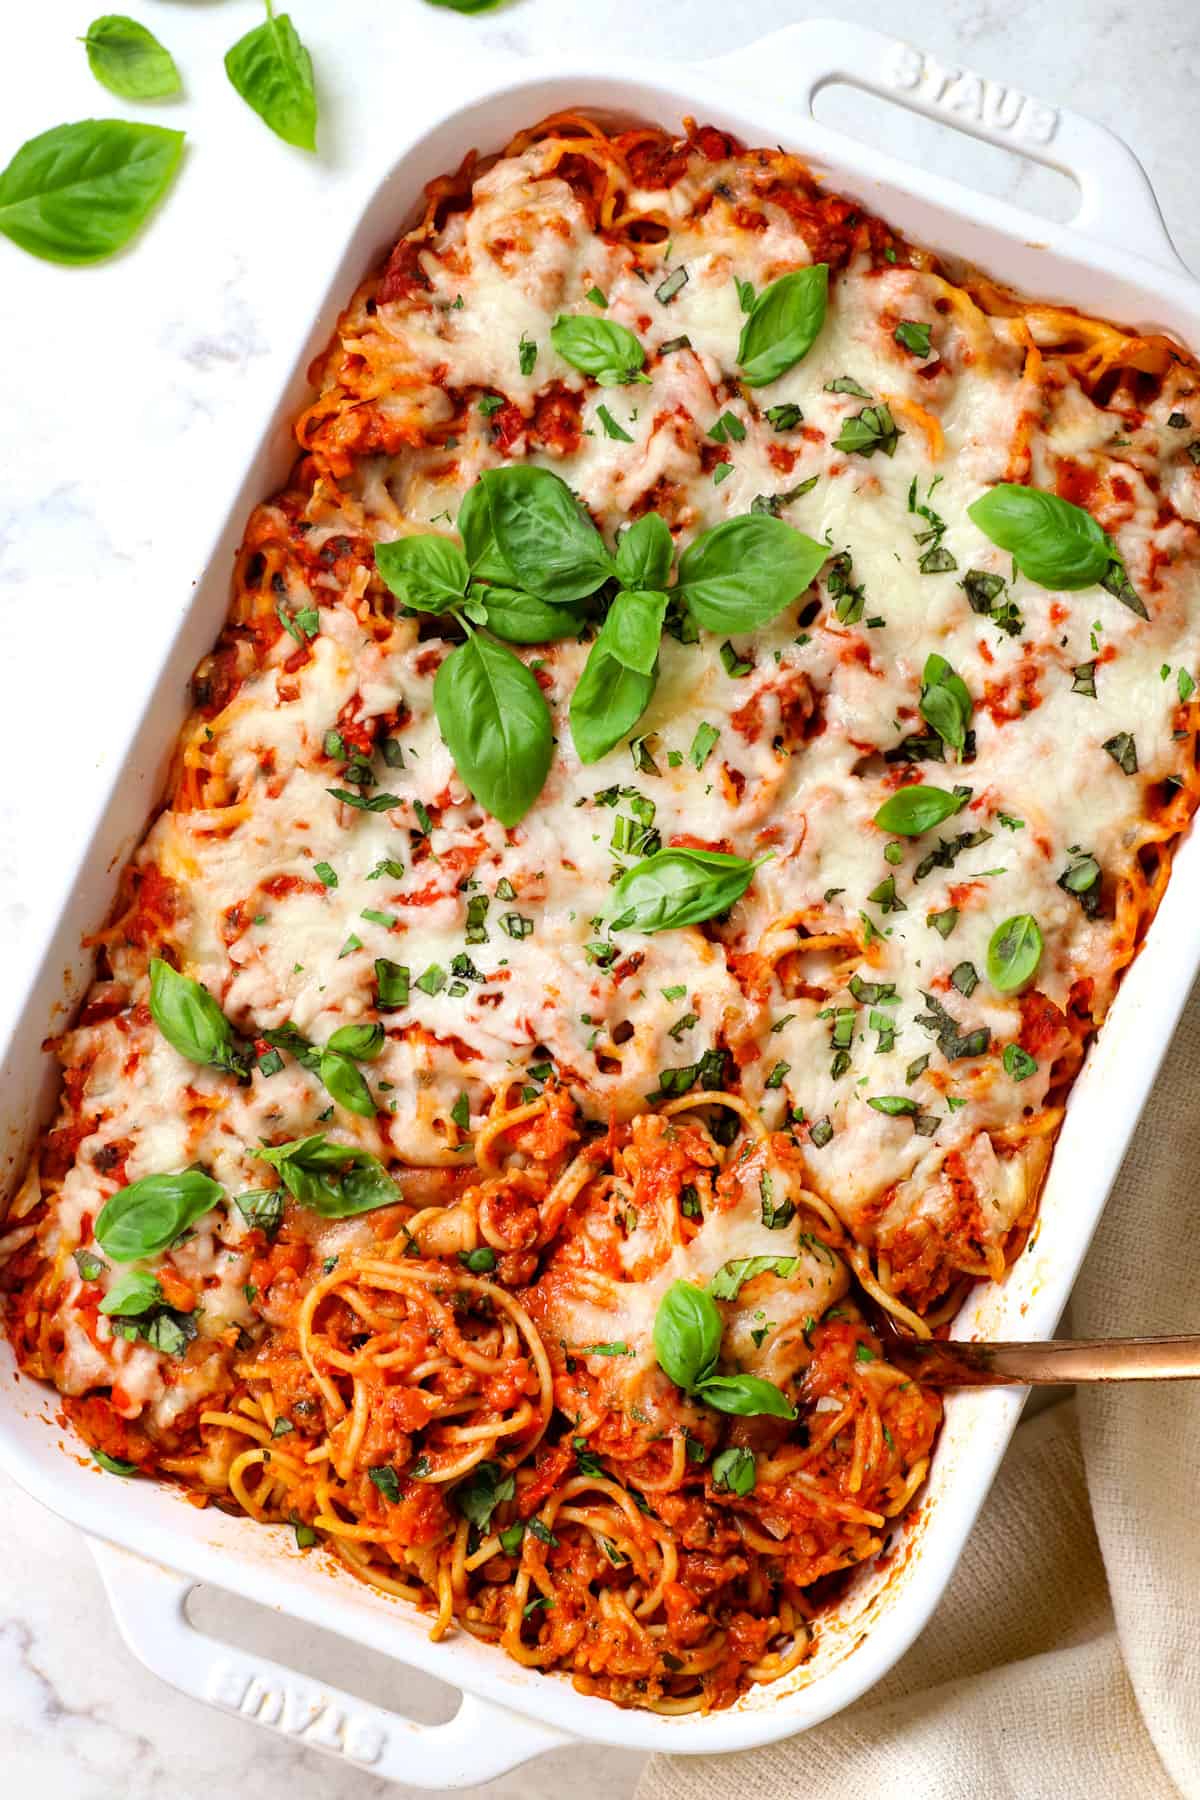 top view of baked spaghetti recipe in a 9x13 baking dish